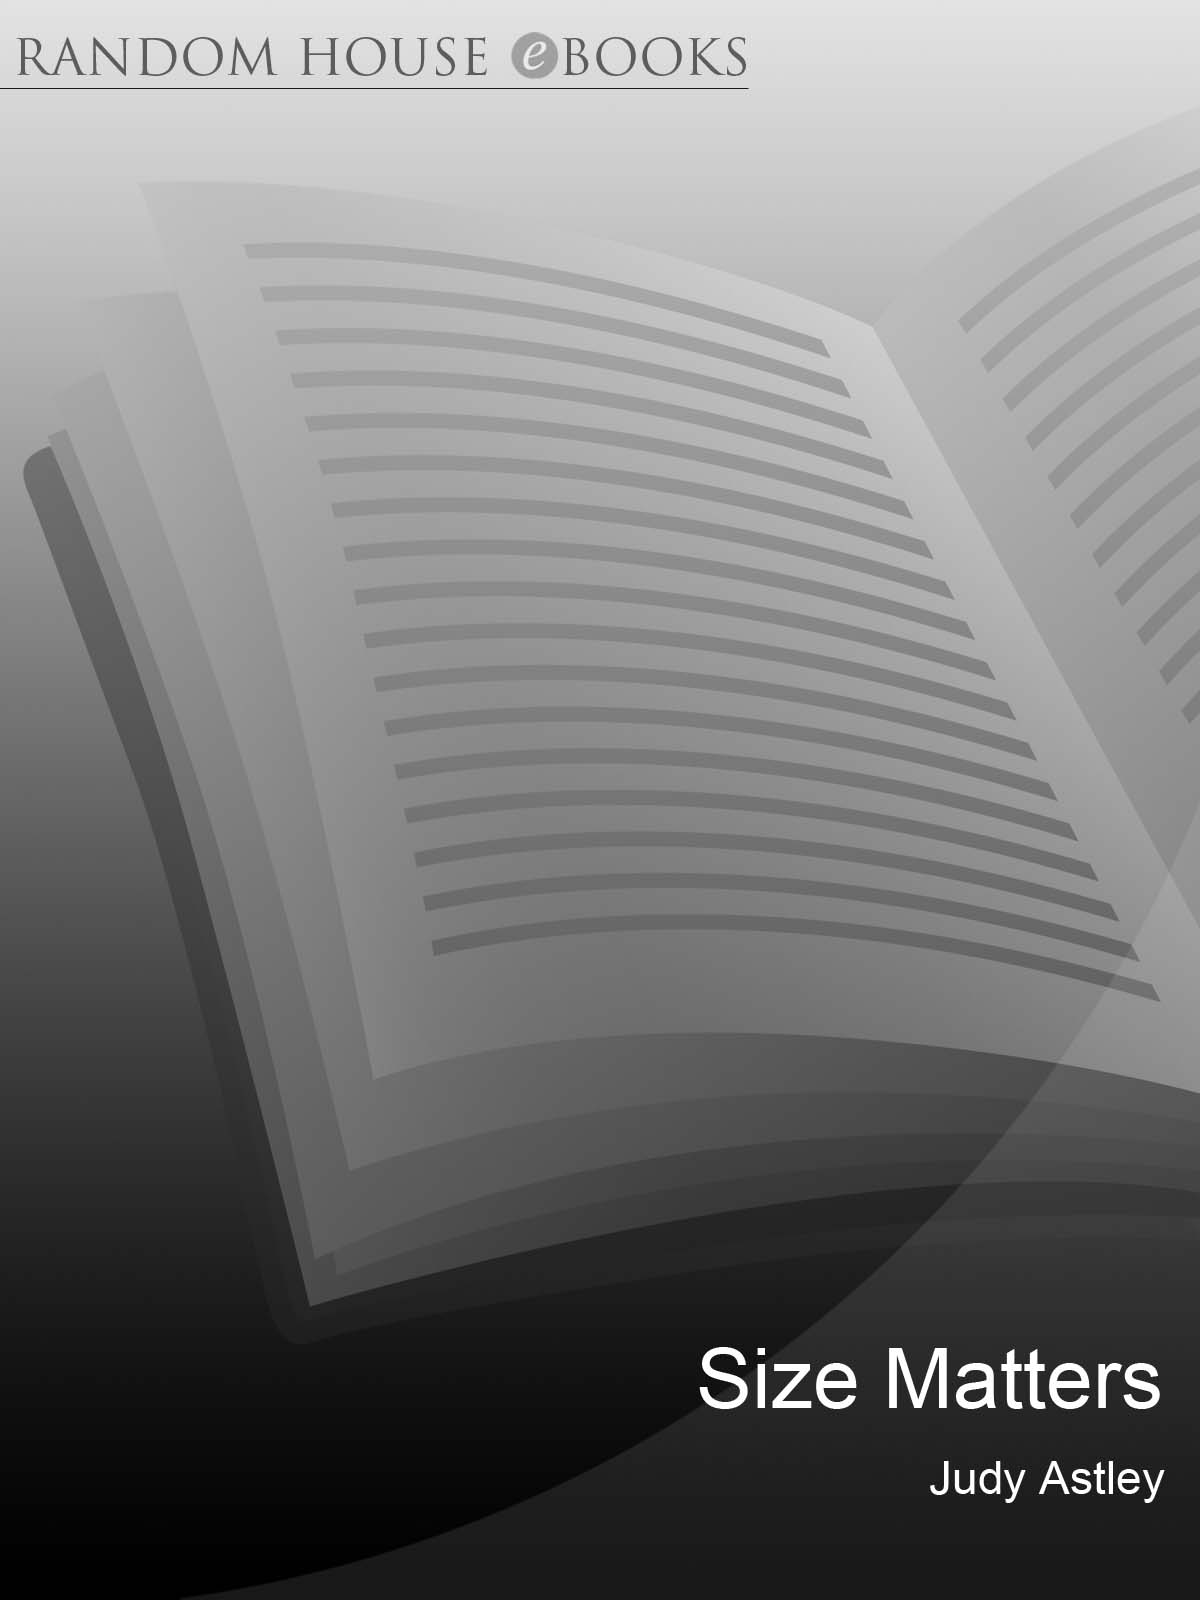 Size Matters (2007) by Judy Astley